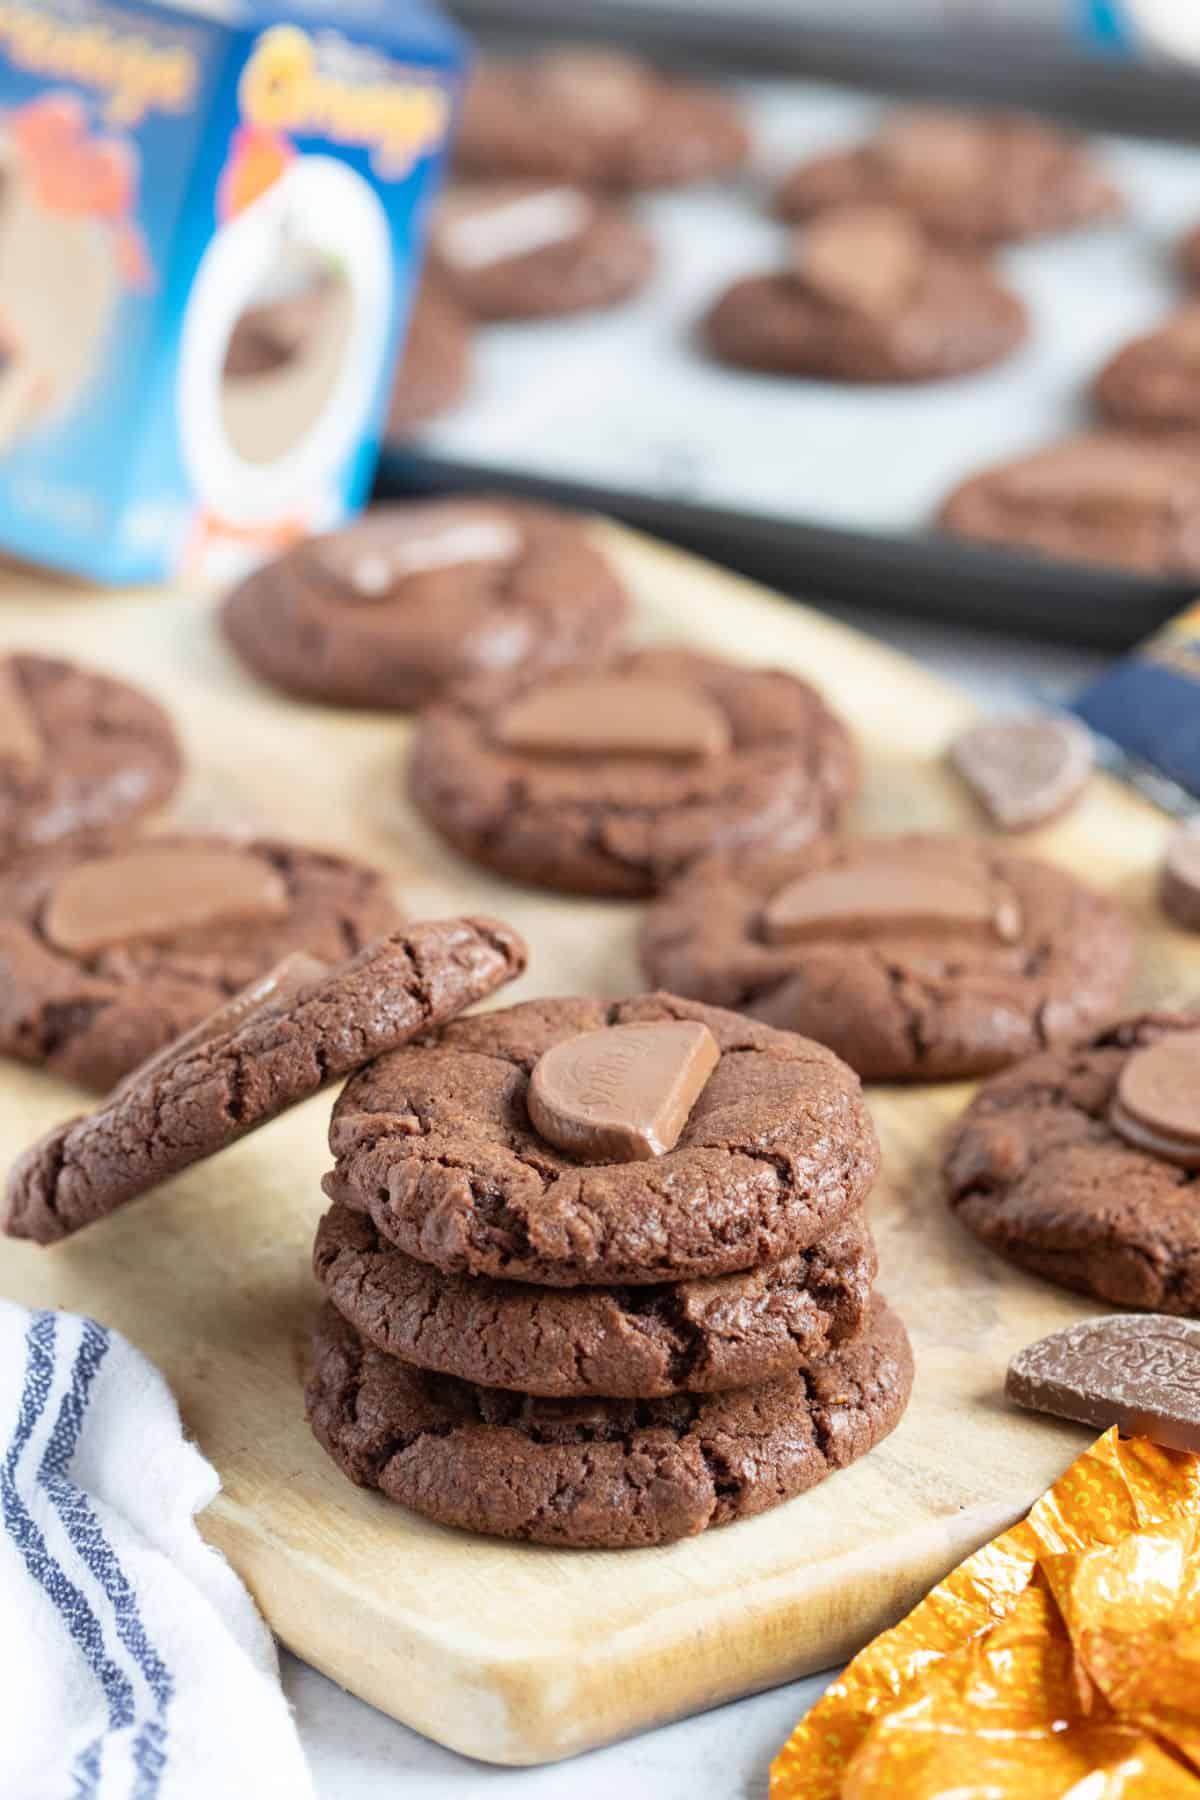 A stack of Terry's Chocolate Orange Cookies.